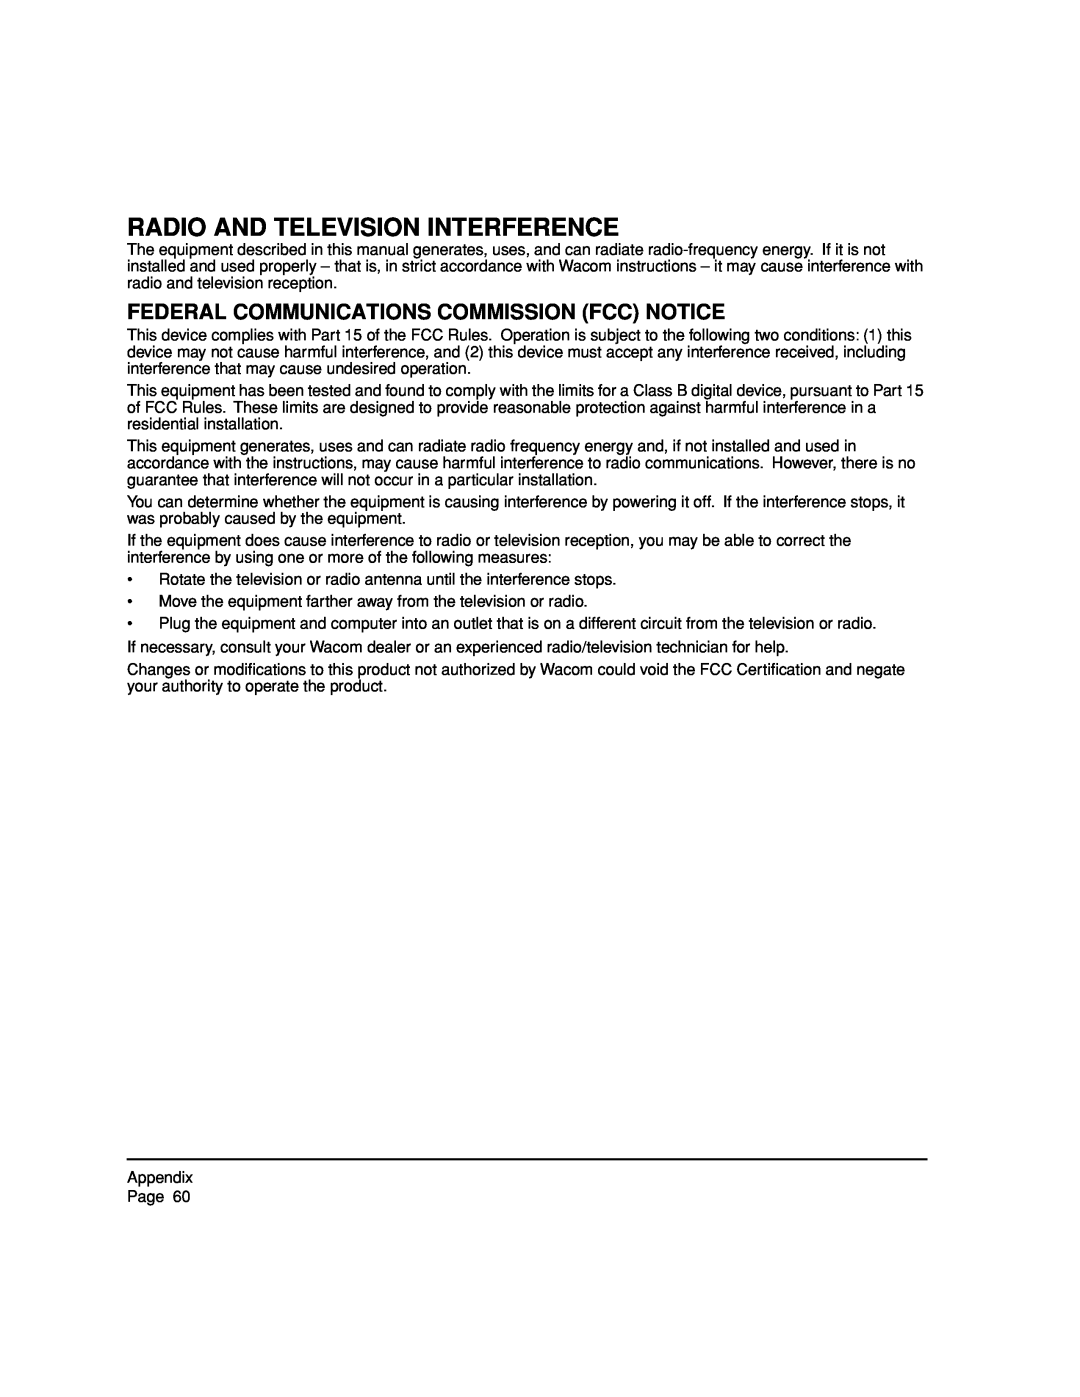 Wacom 12WX, DTZ-1200W manual Radio And Television Interference, Federal Communications Commission Fcc Notice 